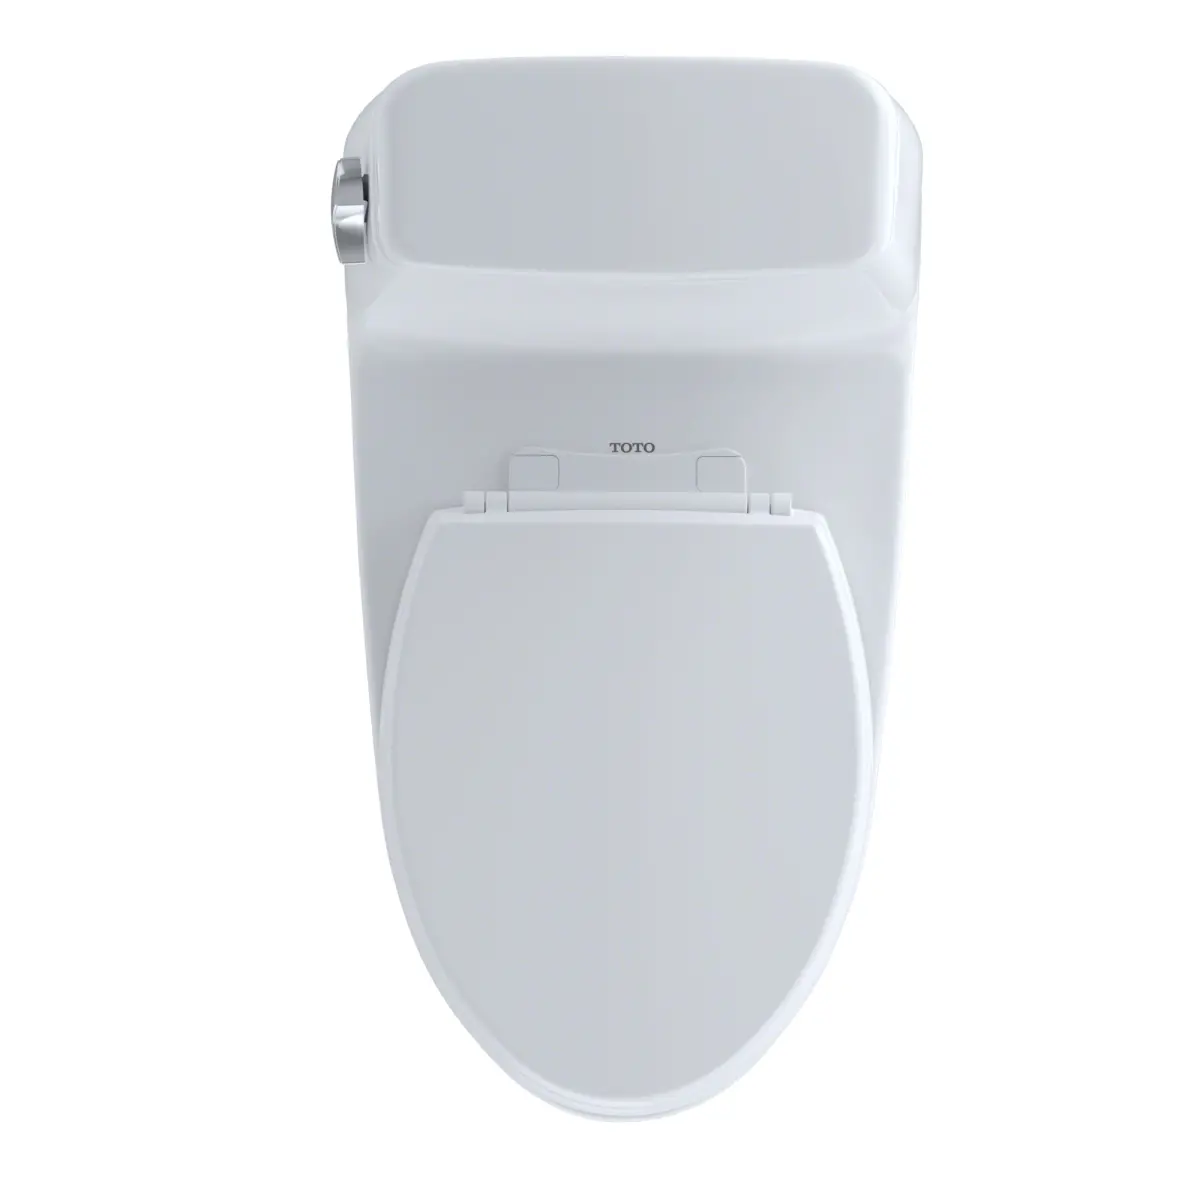 Toto MS854114ELG#01 - Eco UltraMax One-Piece Elongated 1.28 GPF ADA Compliant Toilet with CeFiONtect